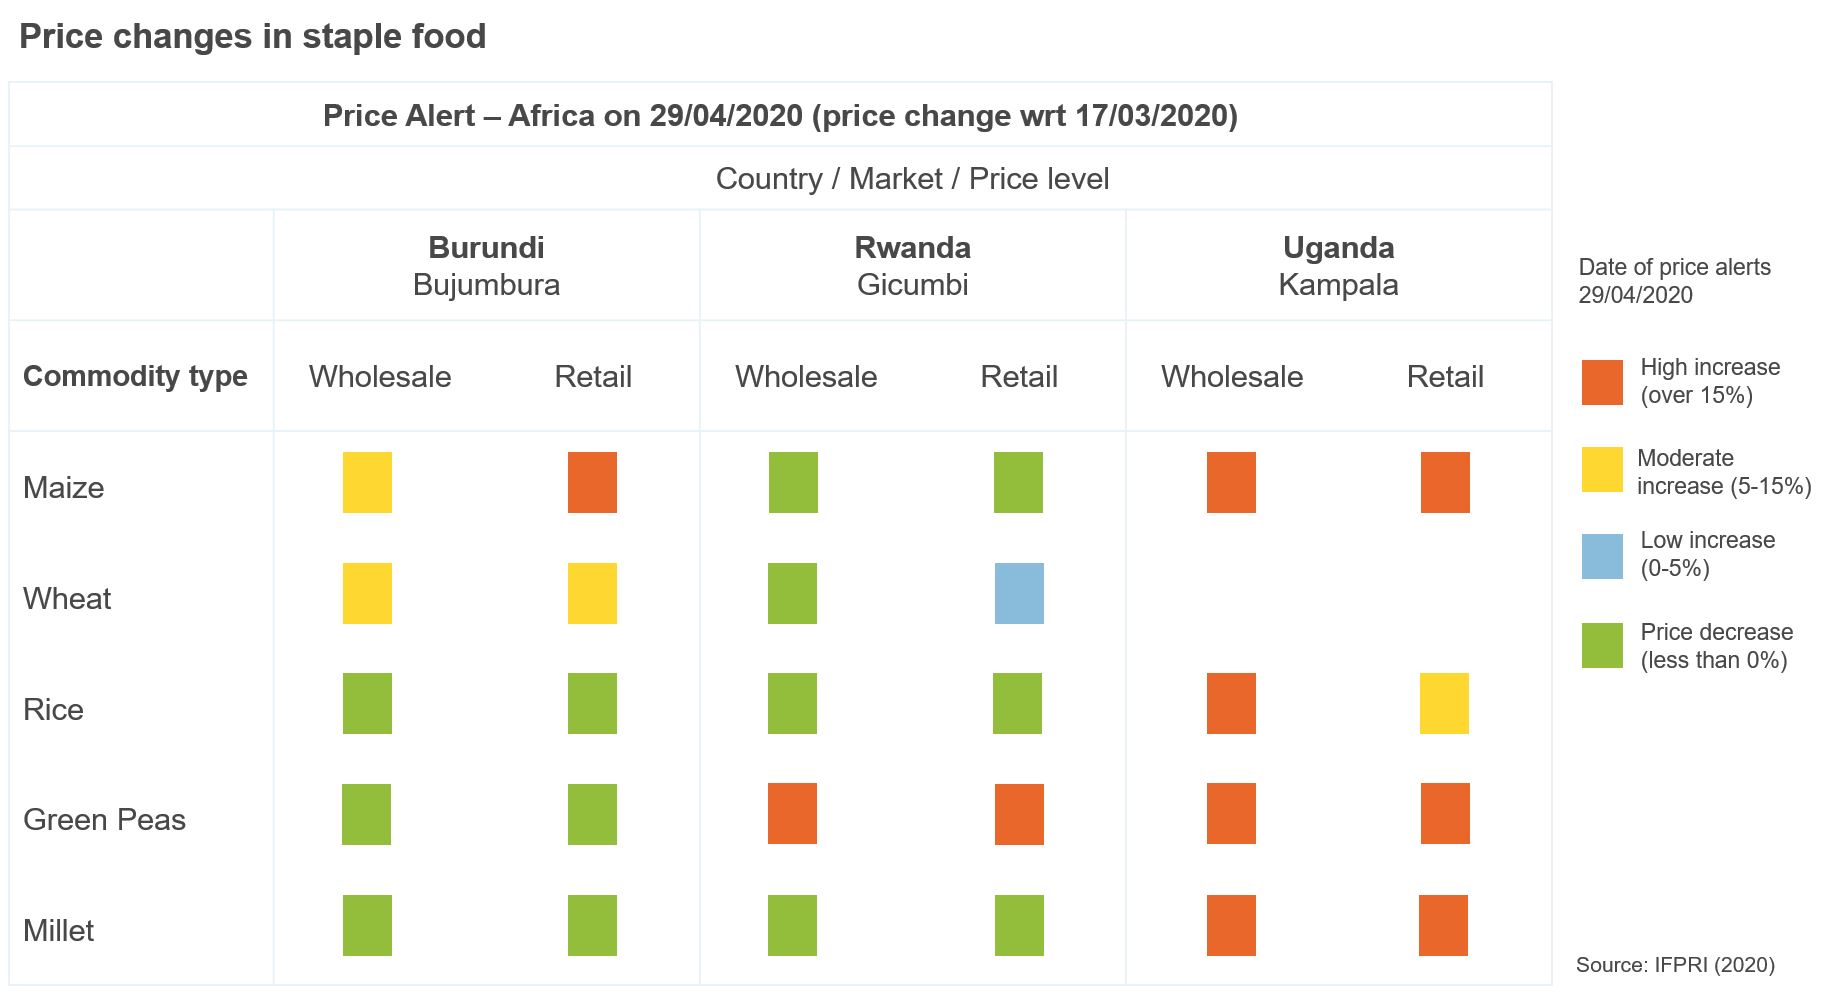 Figure showing price changes in staple food